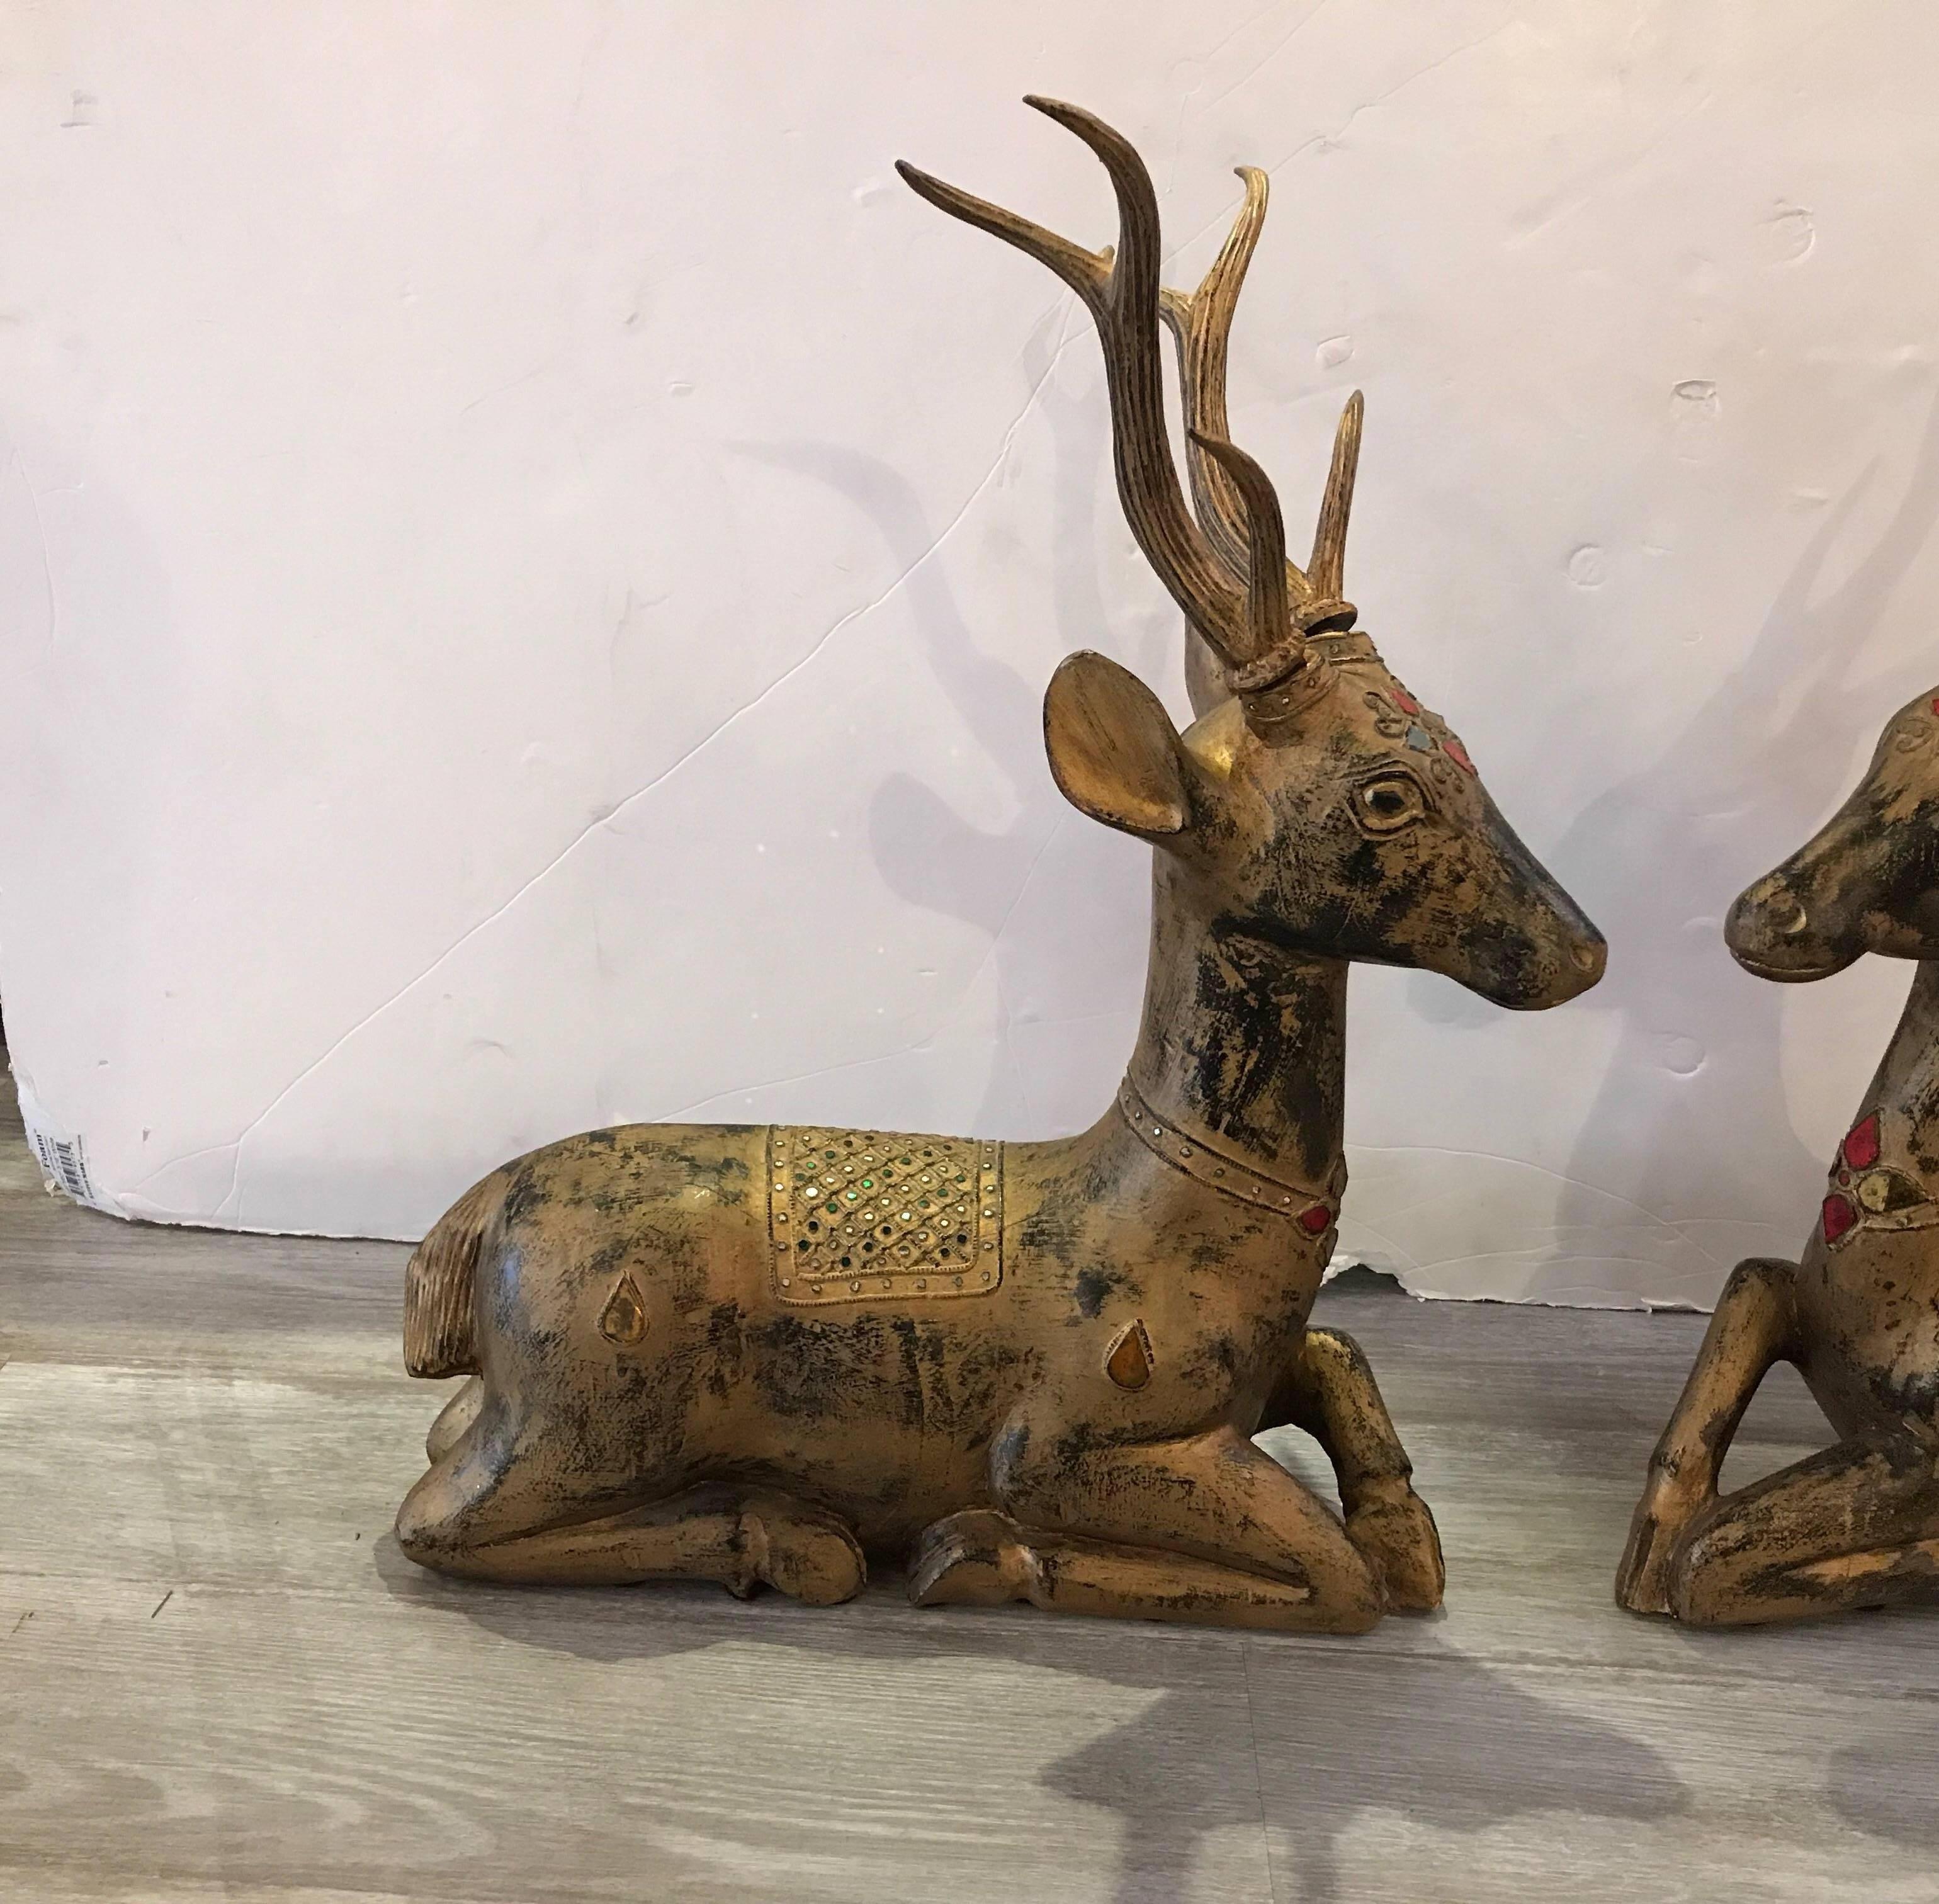 The carved wood figures with original slightly worn gilt finish. Each one a mirror image of each other. The surface with small mirror jewels on the head and front. The carved wood antlers are removable.